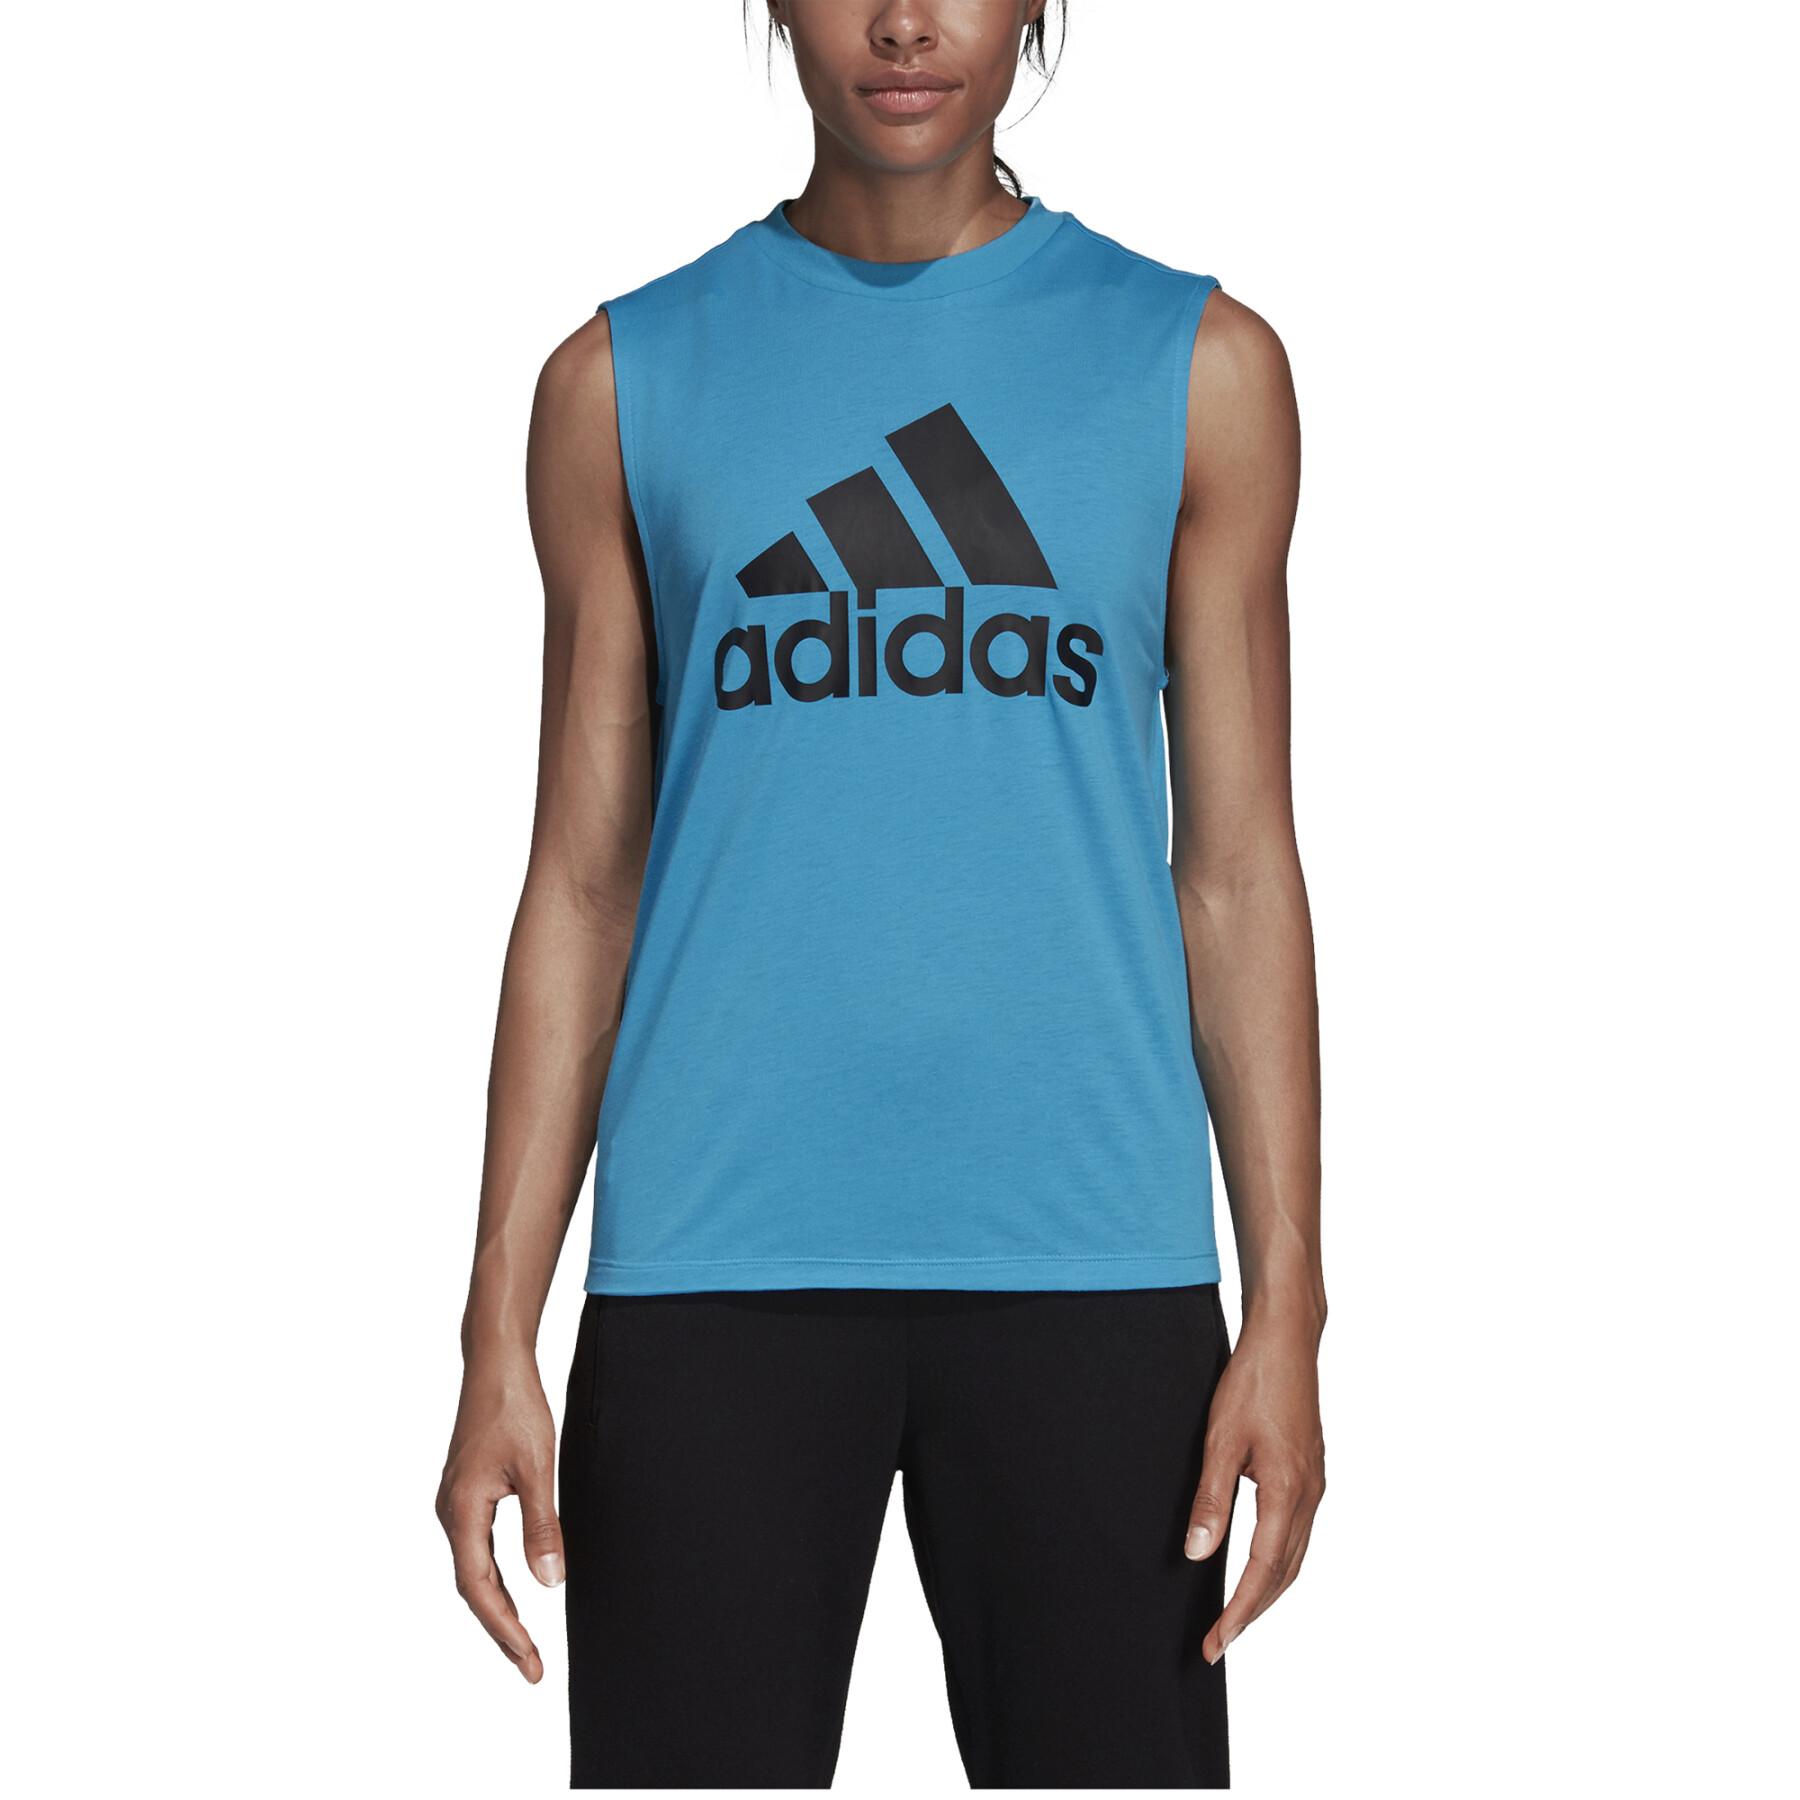 Women's tank top adidas Must Haves Badge of Sport